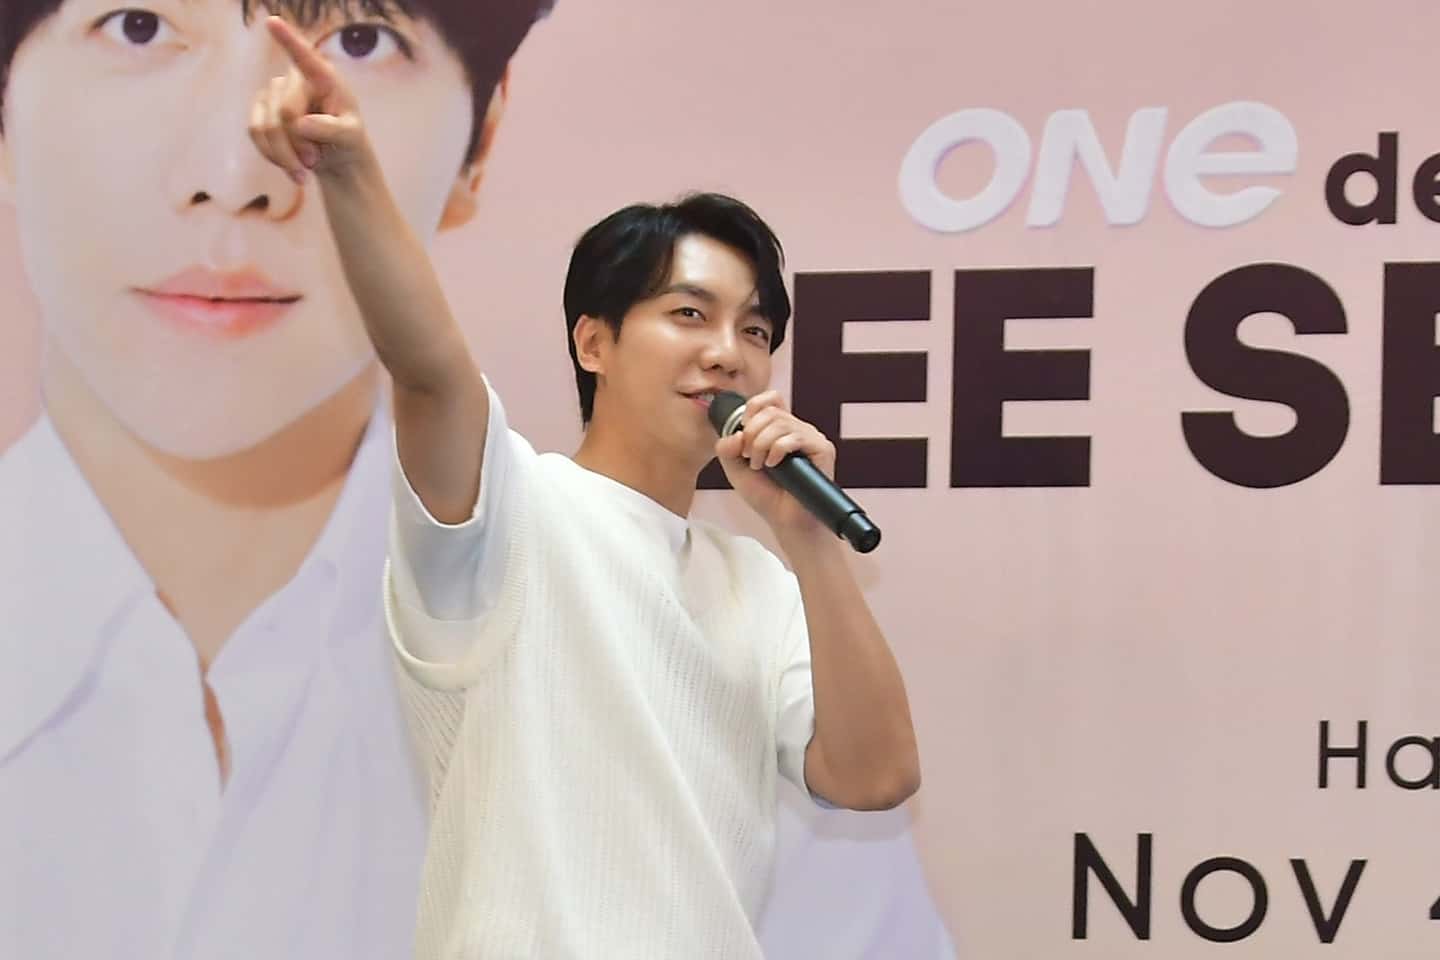 LEE SEUNG GI CAPTIVATES THE HEARTS OF MALAYSIAN FANS DURING LIVE FAN MEET SESSION